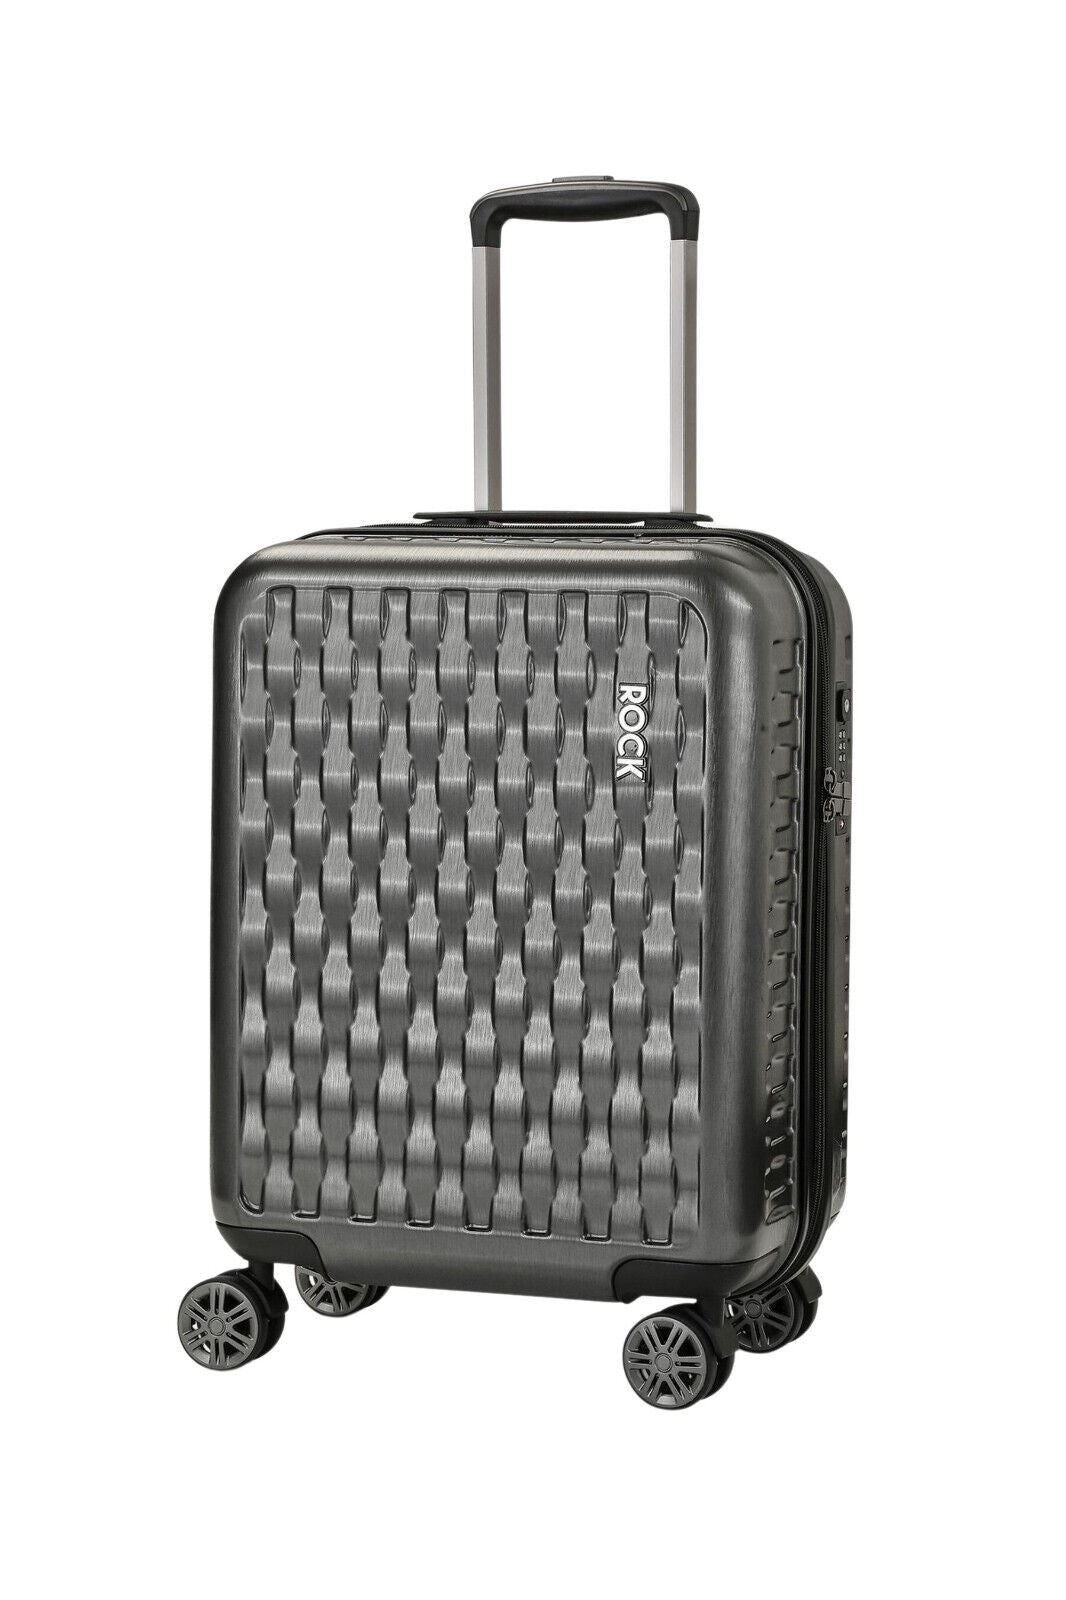 Hard Shell Suitcase 8 Wheel Luggage Trolley Case Holiday Travel Bag - Upperclass Fashions 